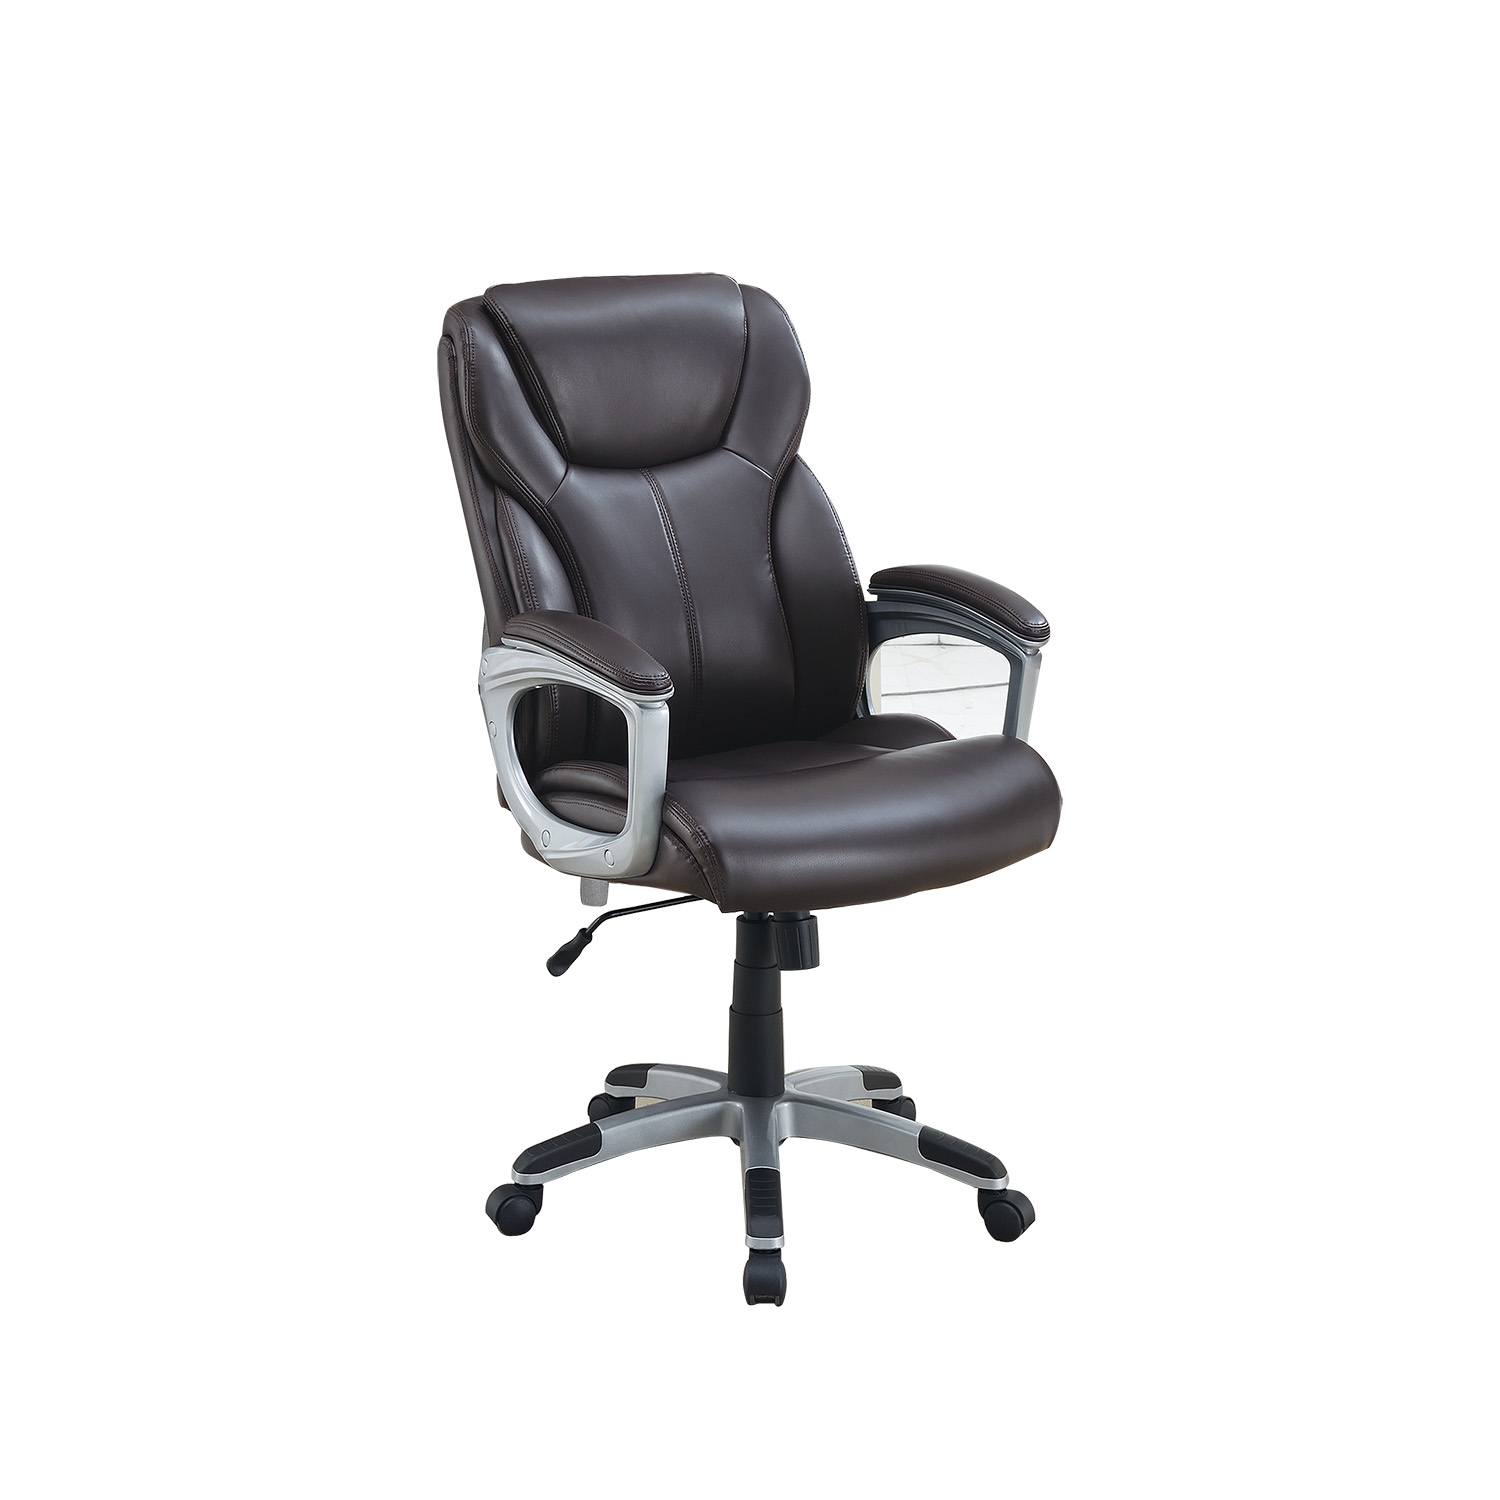 Adjustable Height Office Chair with PU Leather, Brown-CASAINC